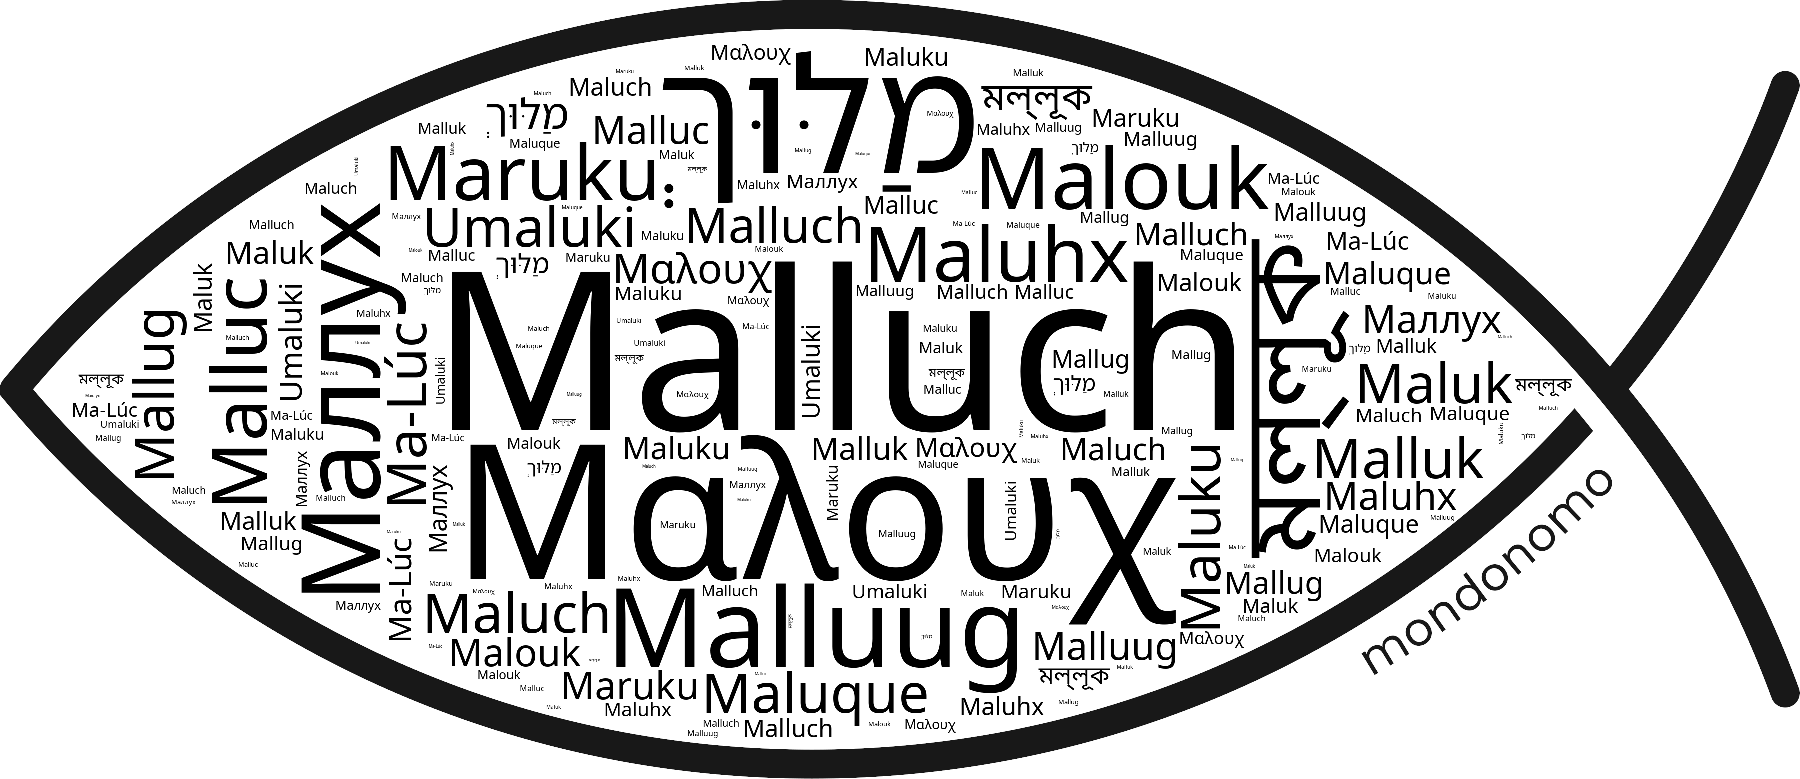 Name Malluch in the world's Bibles